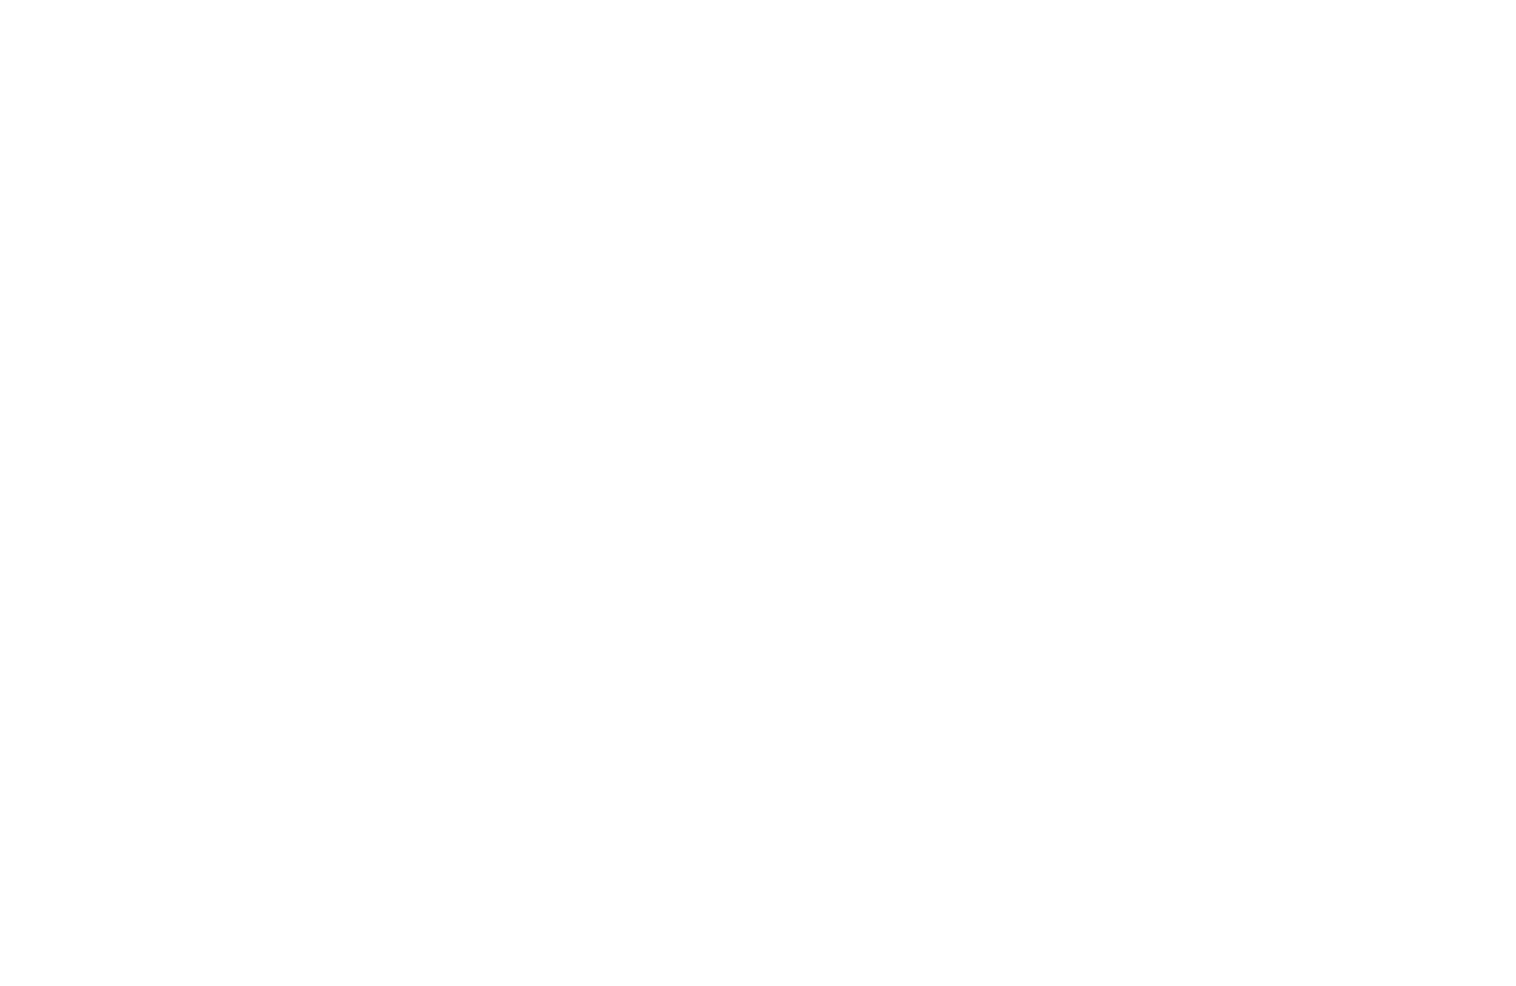 Mindray logo for dark backgrounds (transparent PNG)